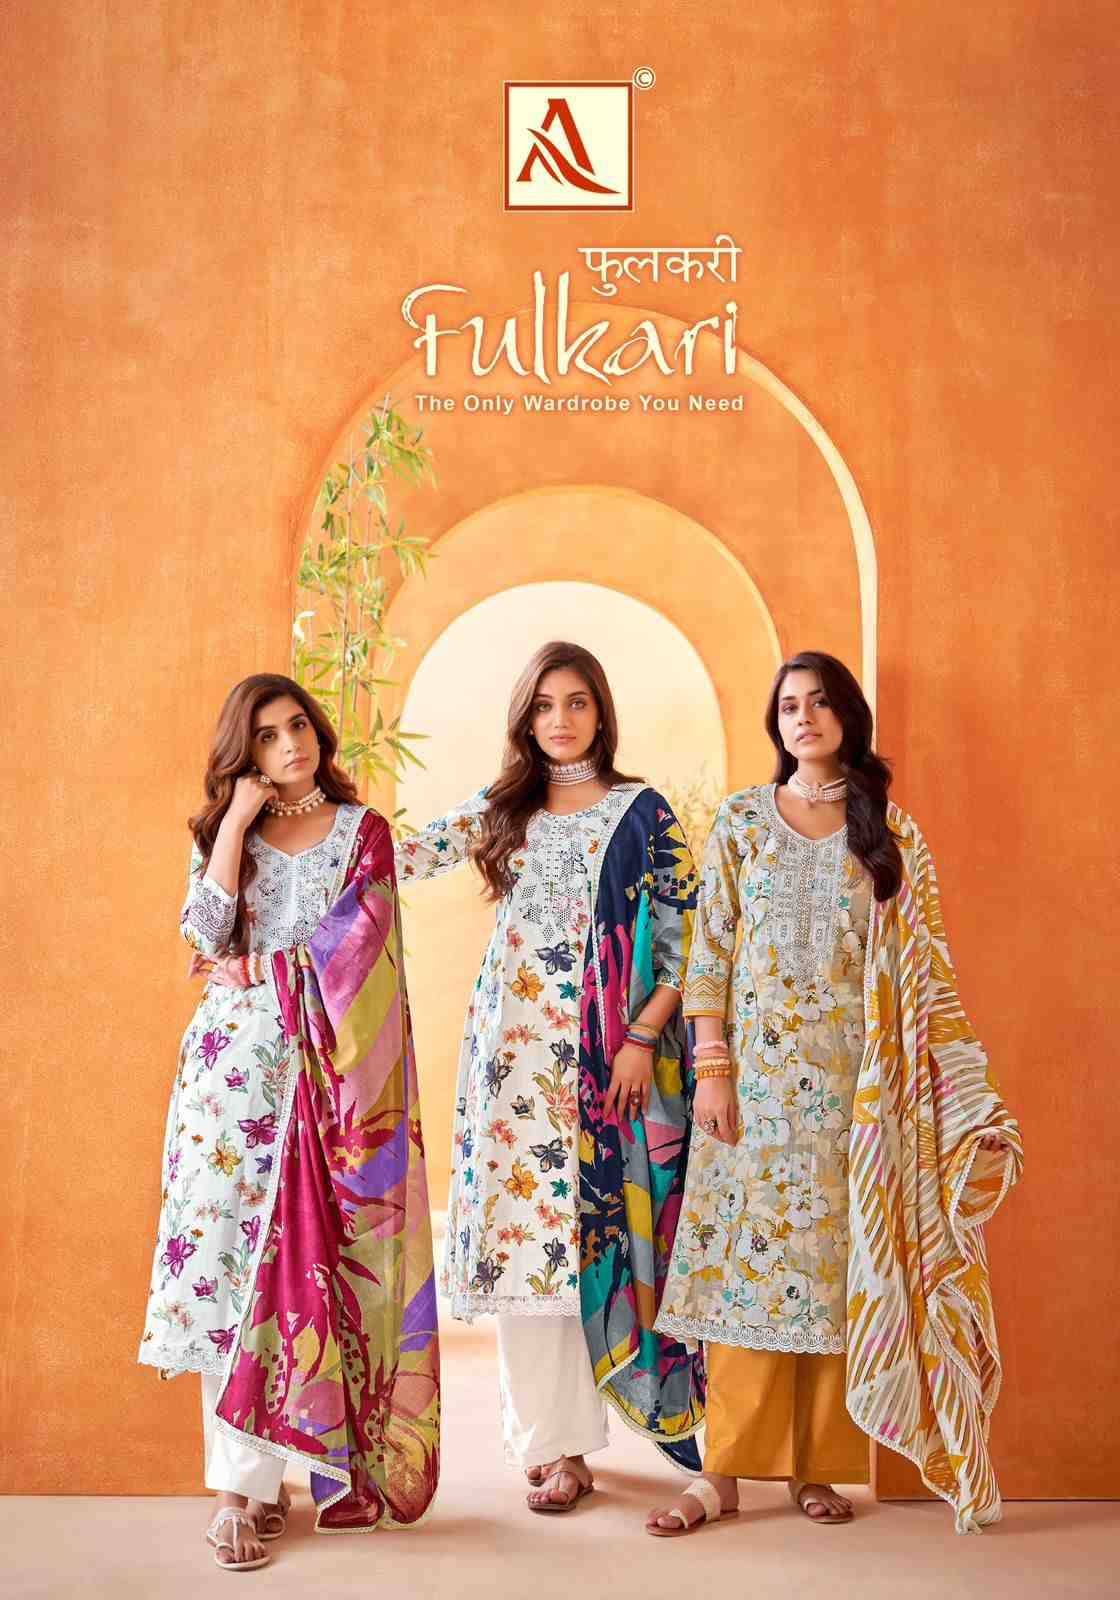 Fulkari By Alok Suit 1523-001 To 1523-008 Series Beautiful Festival Suits Stylish Fancy Colorful Casual Wear & Ethnic Wear Pure Cambric Cotton Print Dresses At Wholesale Price